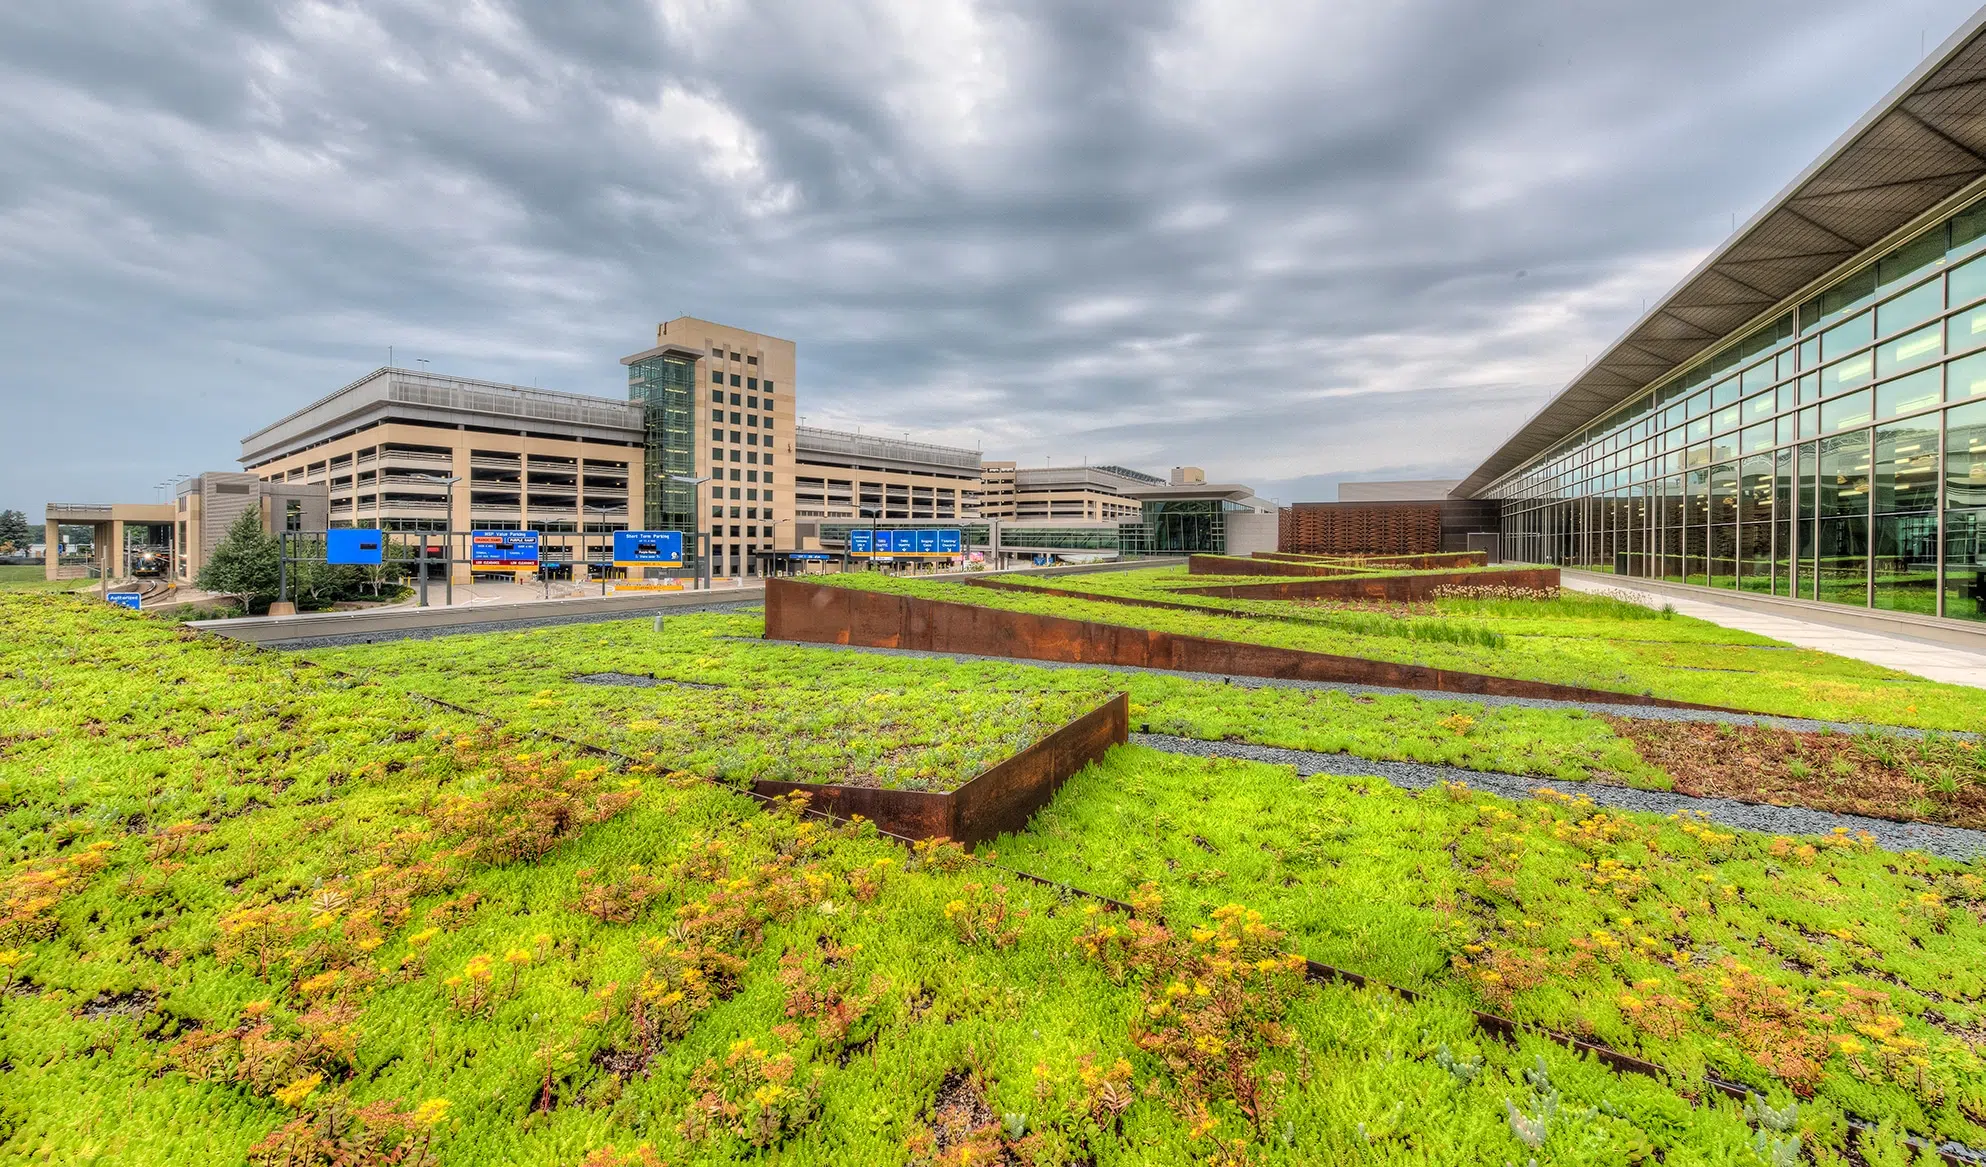 Part of the Minneapolis-St. Paul International Airport Terminal 2-Humphrey expansion, Kimley-Horn landscape architects designed the first green roof at MSP.